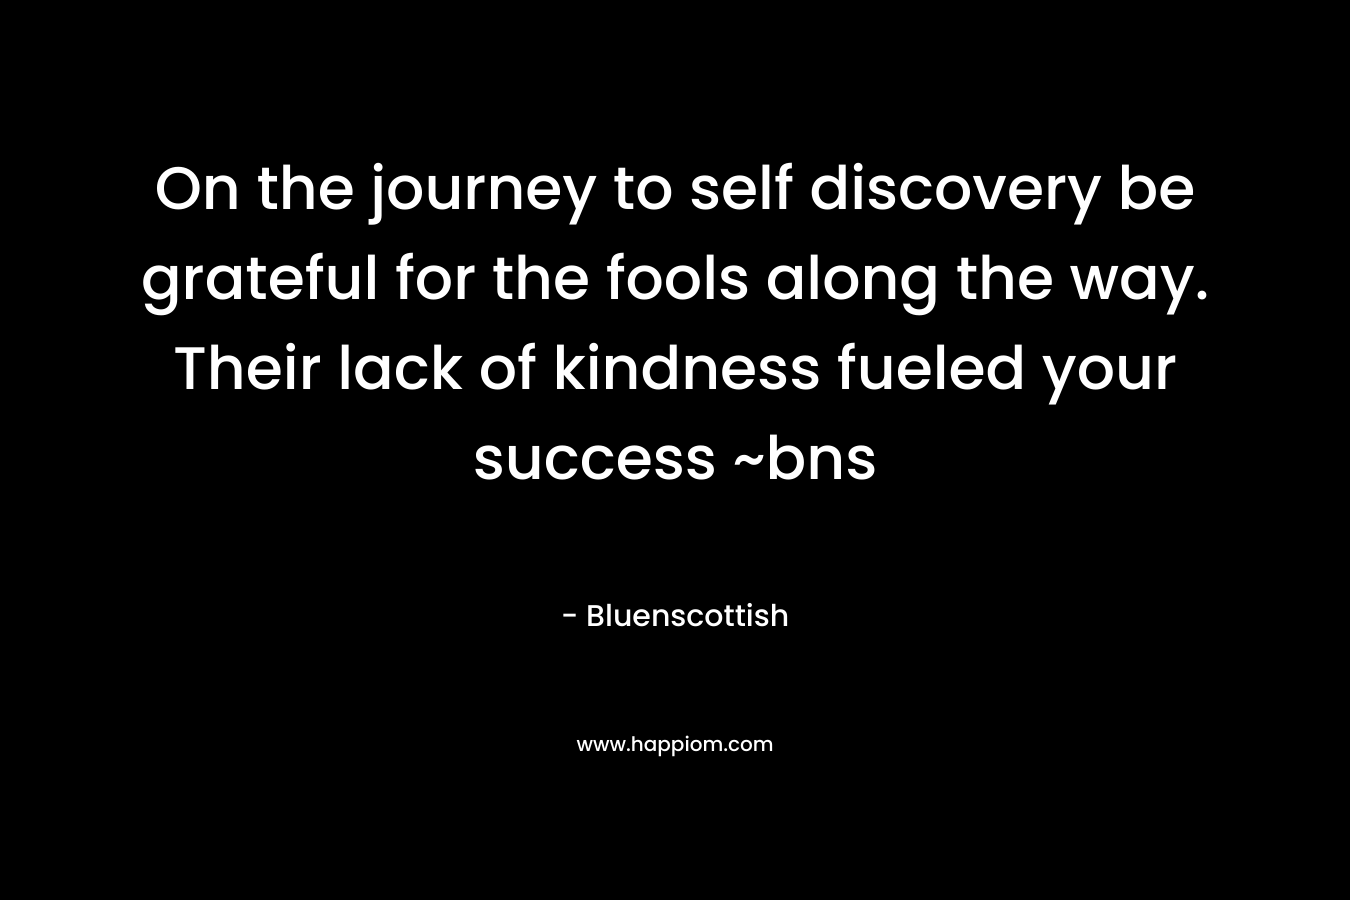 On the journey to self discovery be grateful for the fools along the way. Their lack of kindness fueled your success ~bns